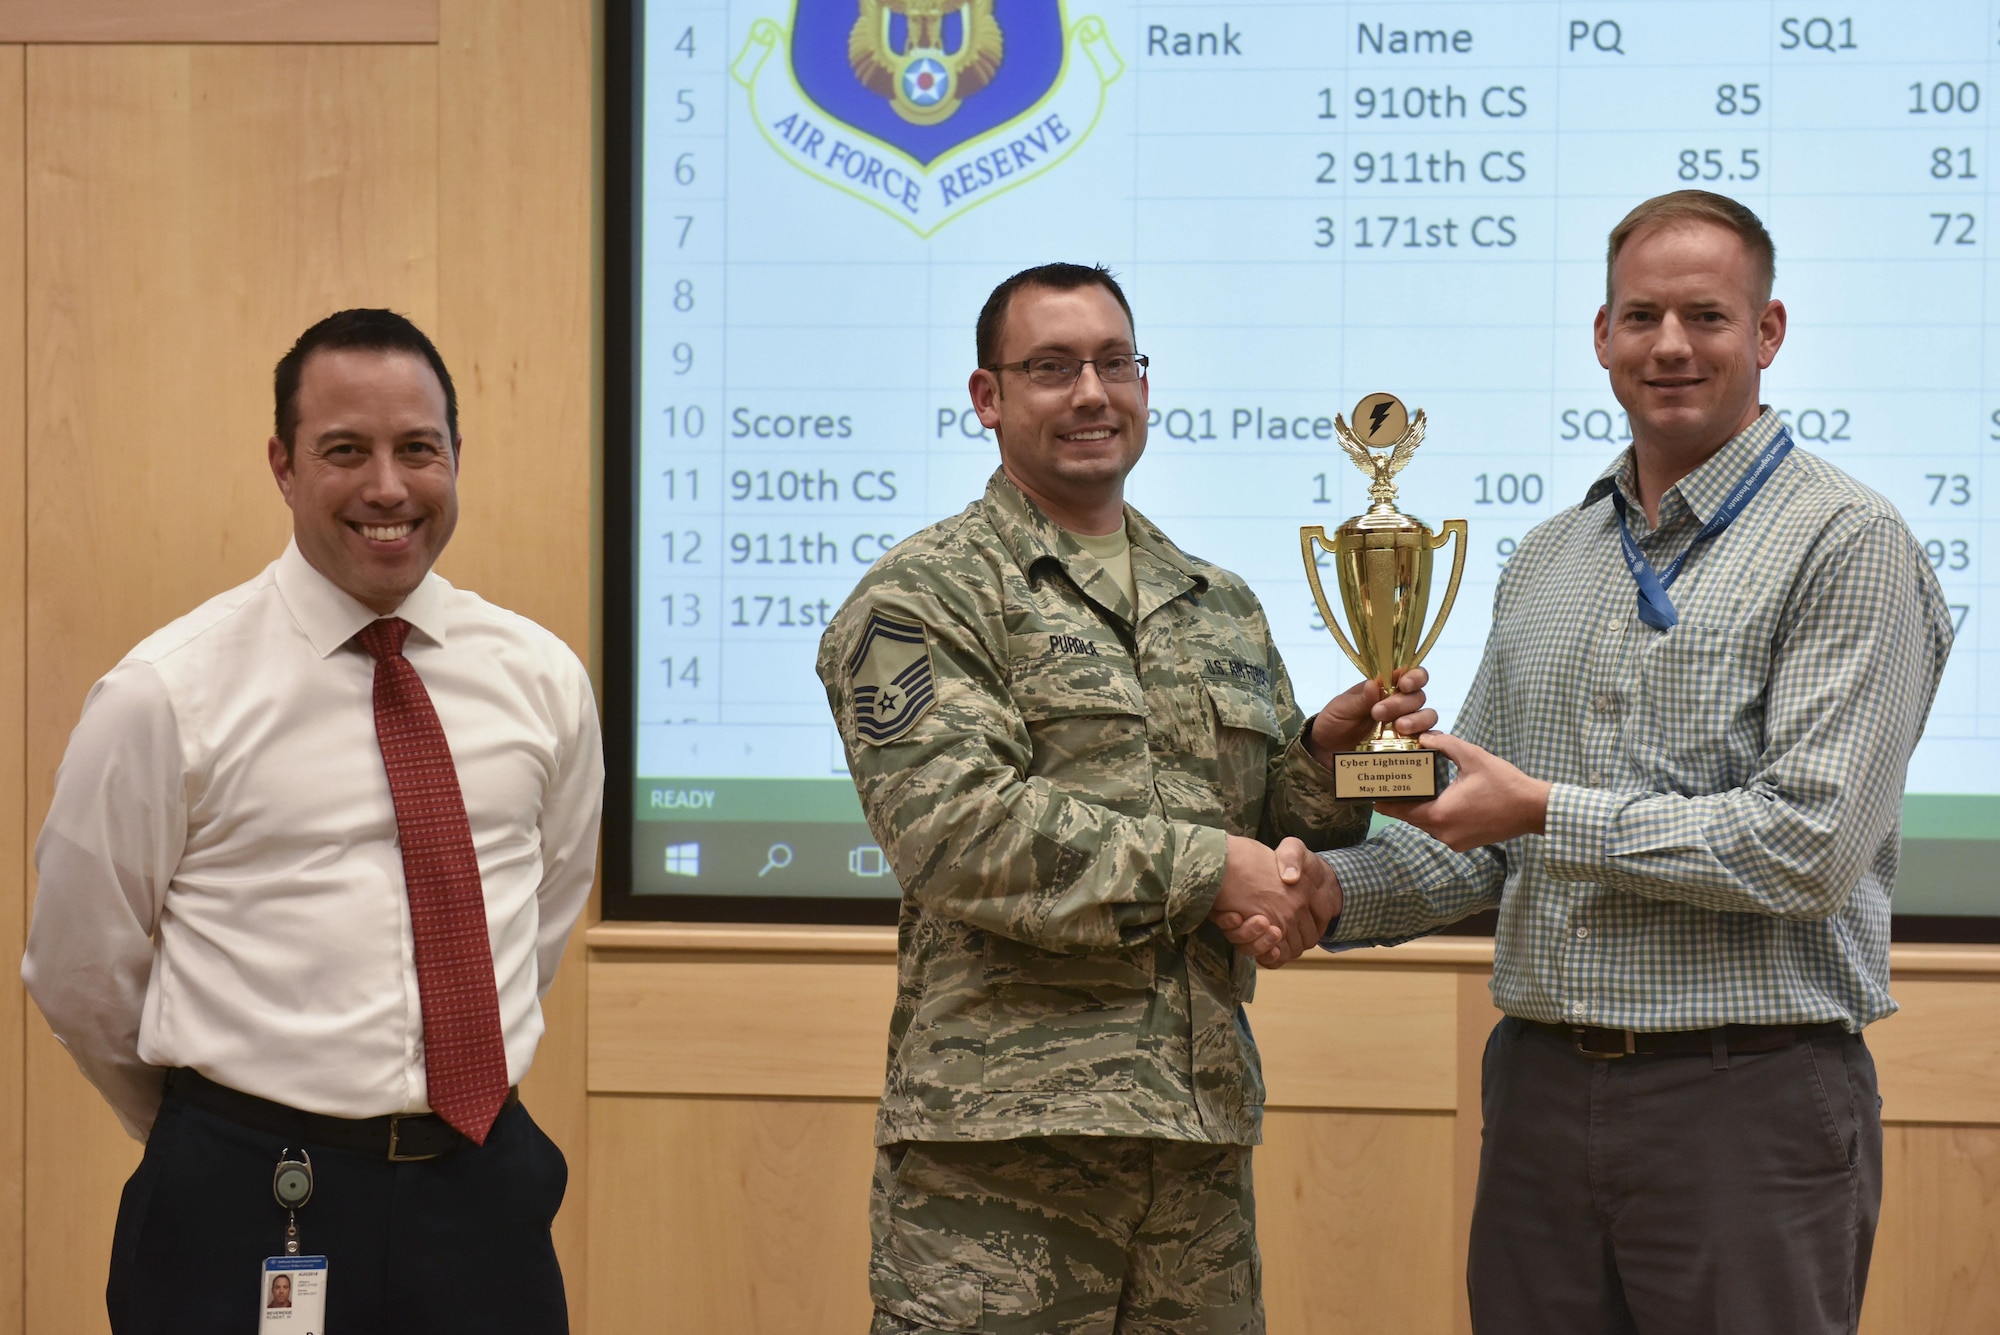 Captain Geoffrey Dobson, cyber war gaming program manager at Carnegie Melon University and officer in charge of cyber assurance with the 911th Airlift Wing, and Master Sgt. Robert Beveridge, and software engineer at CMU and computer systems operator with the 910th Airlift Wing, present a trophy to Senior Master Sgt. Jamie Purola, cyber operations flight chief with the 910th Airlift Wing, at Carnegie Melon University, Pennsylvania, May 18, 2016. The 910th was the winner of the Cyber Lightning exercise held at CMU, where teams from the 911th AW, the 910th AW and the 171st Air Refueling Squadron competed to eliminate cyber threats in a training cyber environment. (U.S. Air Force photo by Airman Beth Kobily)